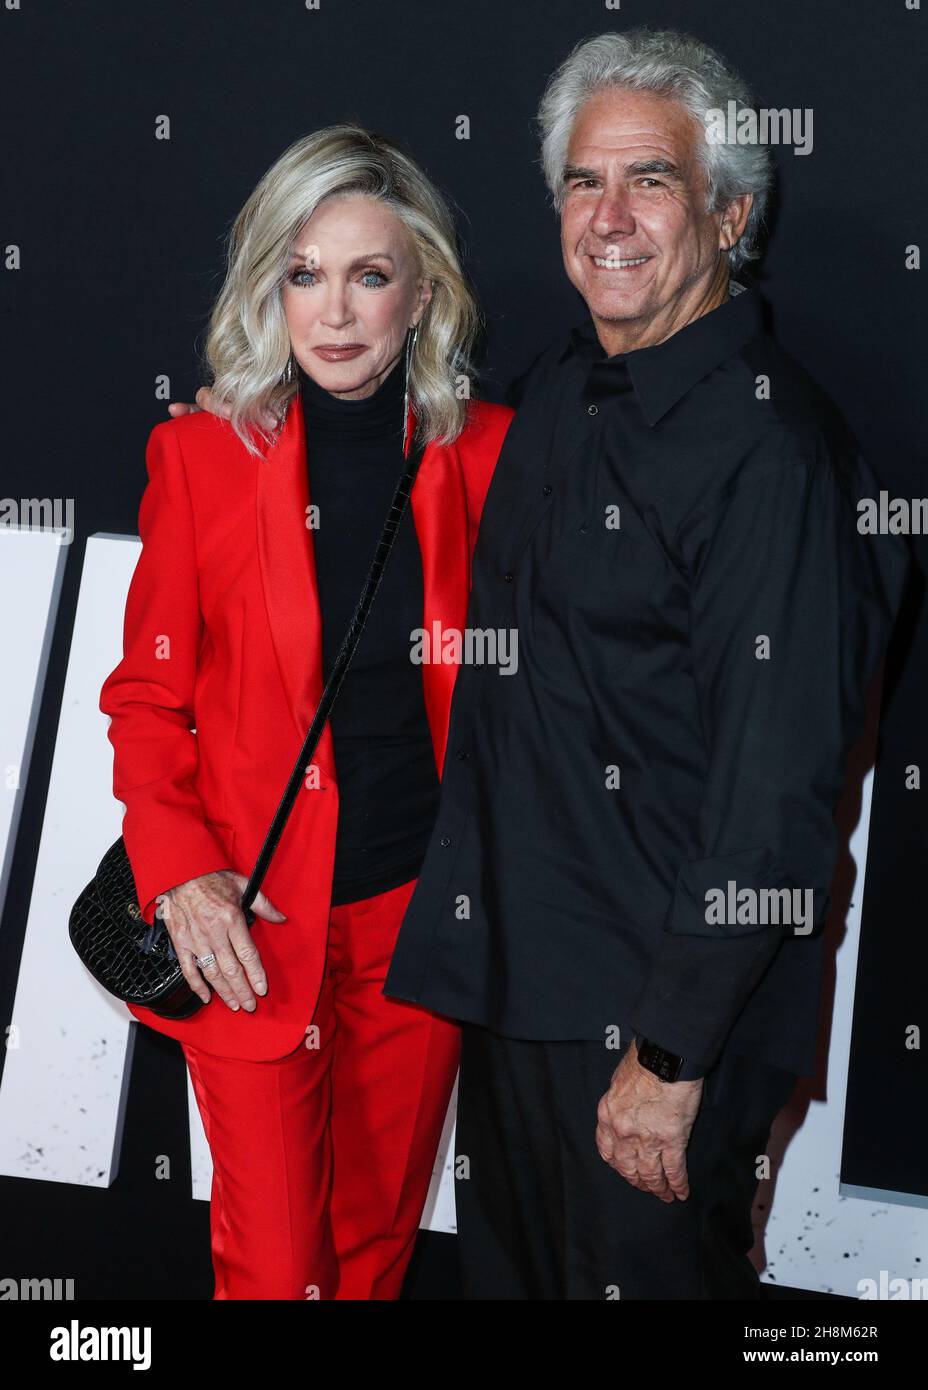 Los Angeles United States 30th Nov 2021 Los Angeles California Usa November 30 Actress Donna Mills And Partneractor Larry Gilman Arrive At The Los Angeles Premiere Of Netflixs The Unforgivable Held At The Directors Guild Of America Theater On November 30 2021 In Los Angeles California United States Photo By Xavier Collinimage Press Agency Credit Image Press Agencyalamy Live News 2H8M62R 